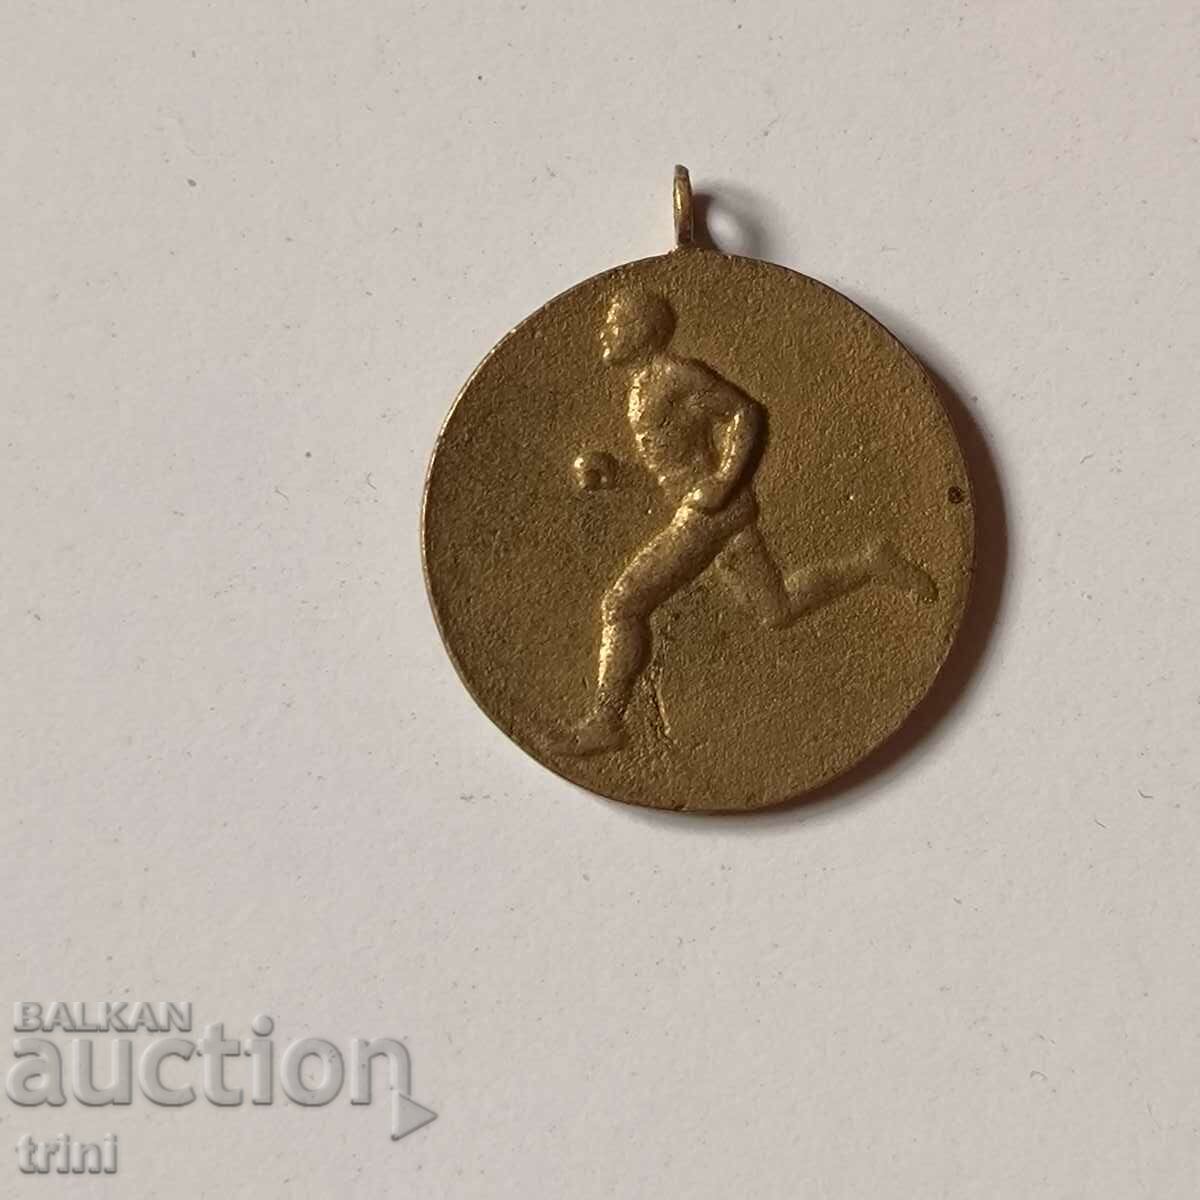 Sports medal 1946 - cross country